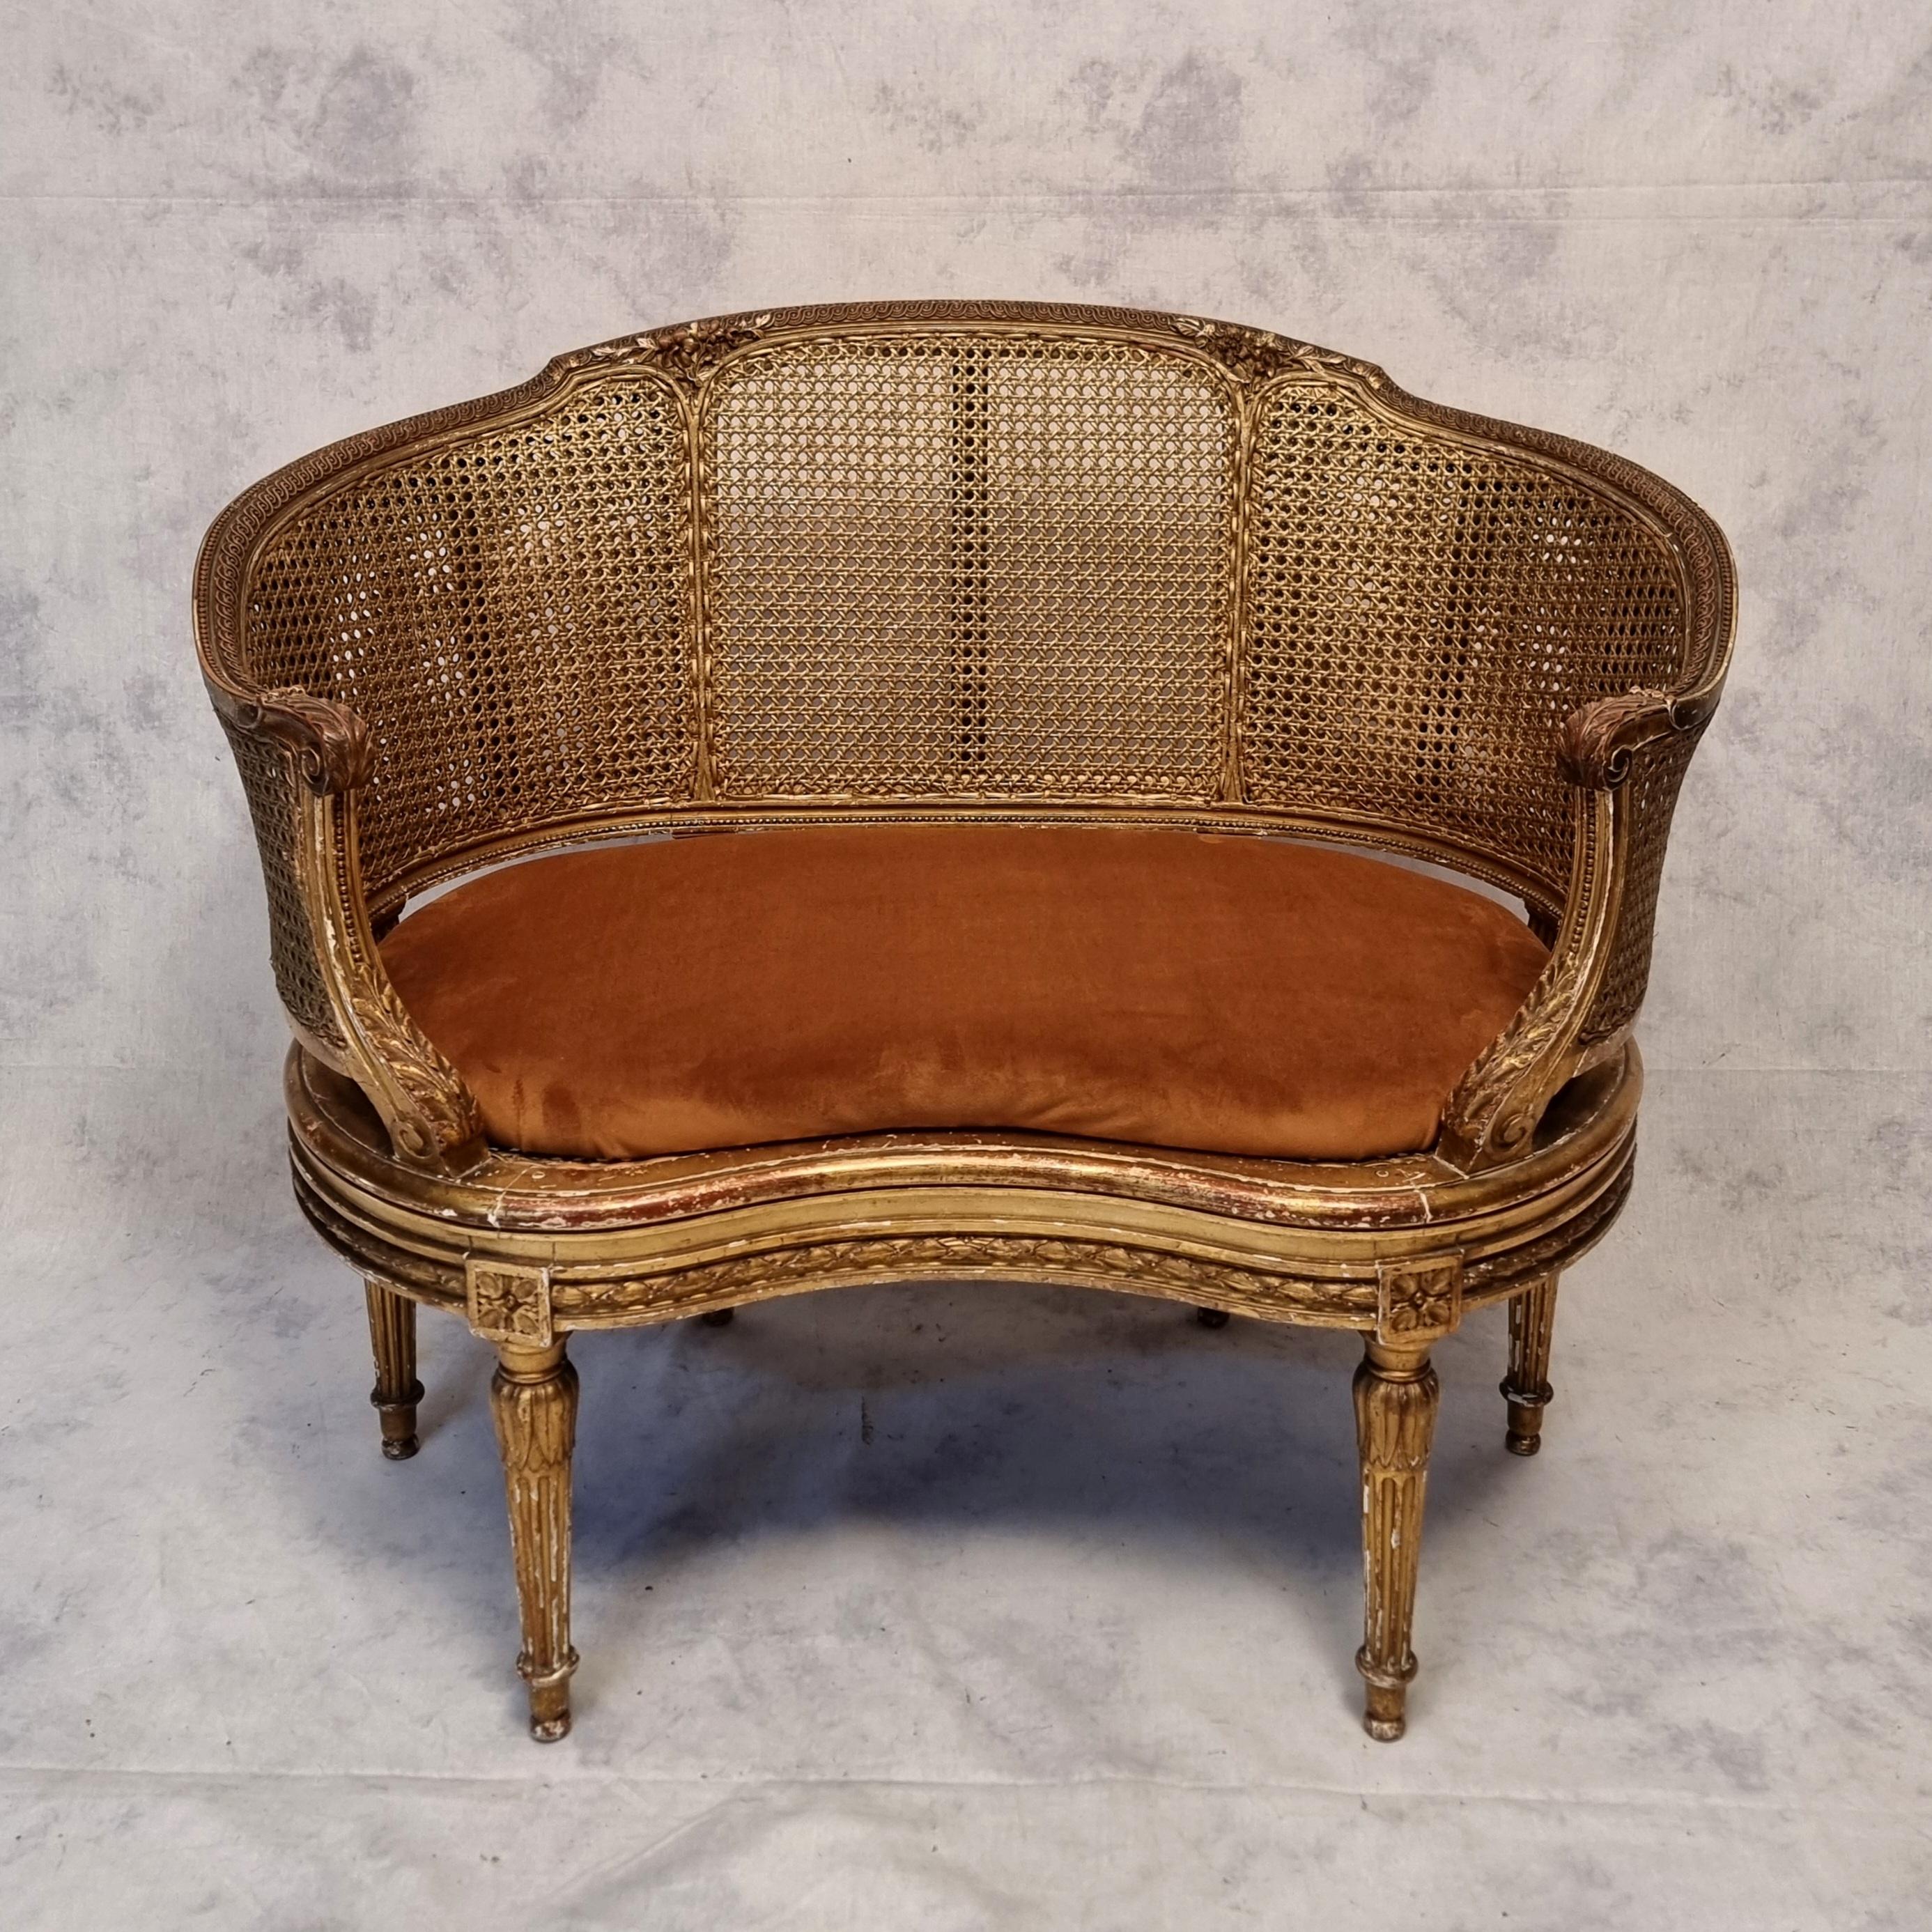 19th Century Small Louis XVI Style Sofa - Caning & Golden Wood - 19th